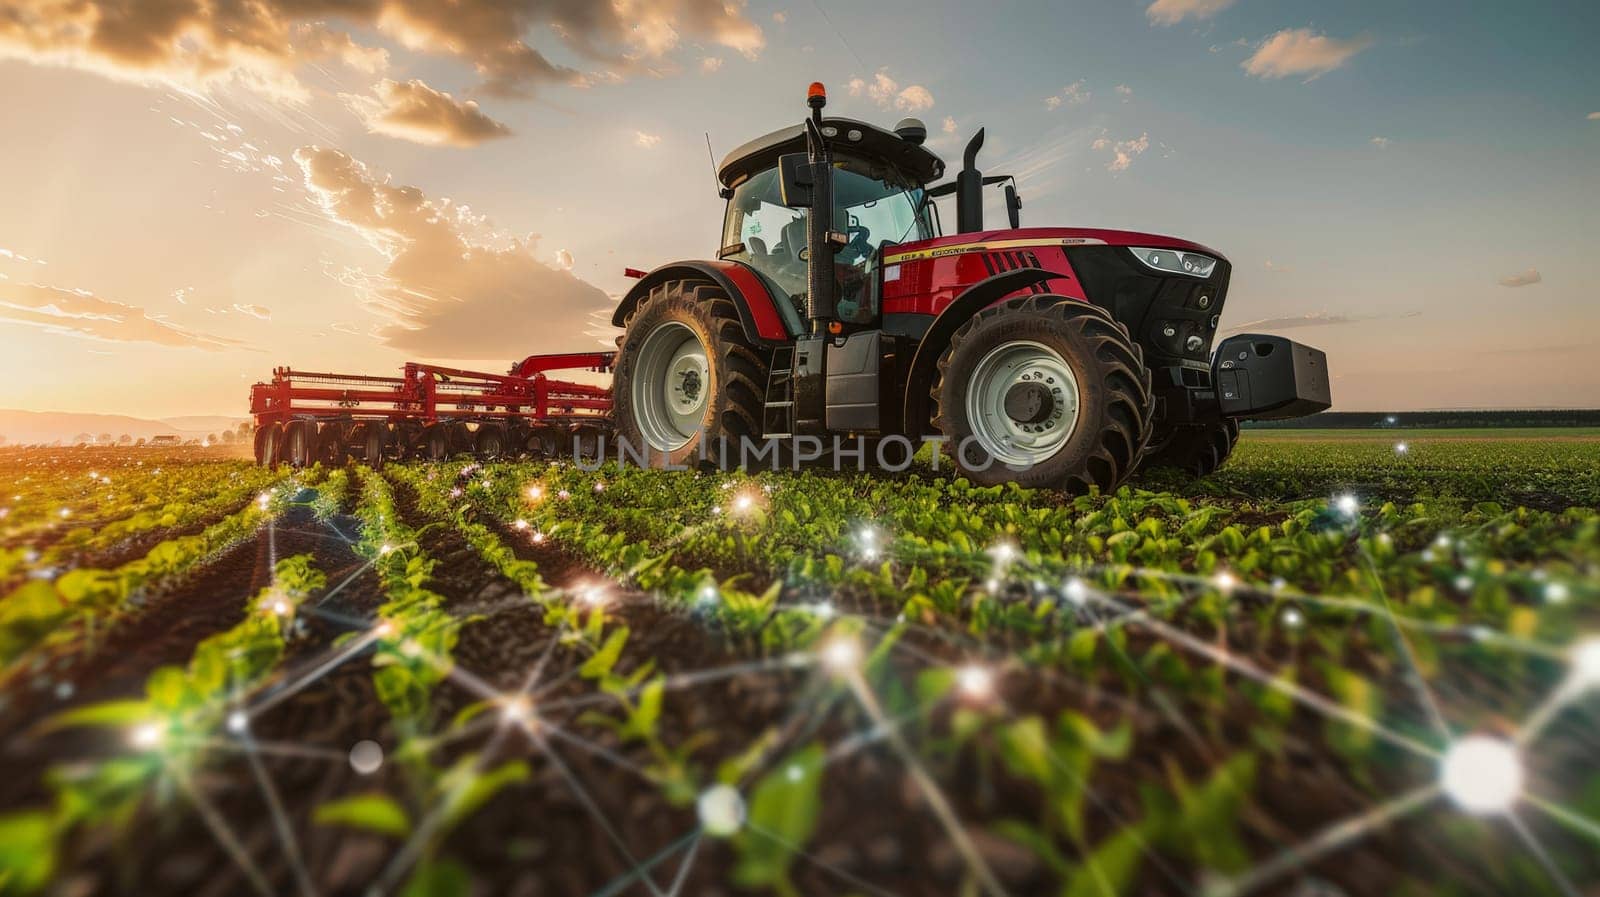 Tractor on the field, Tractors cultivate the soil in rural areas. The concept of technological agriculture by nijieimu